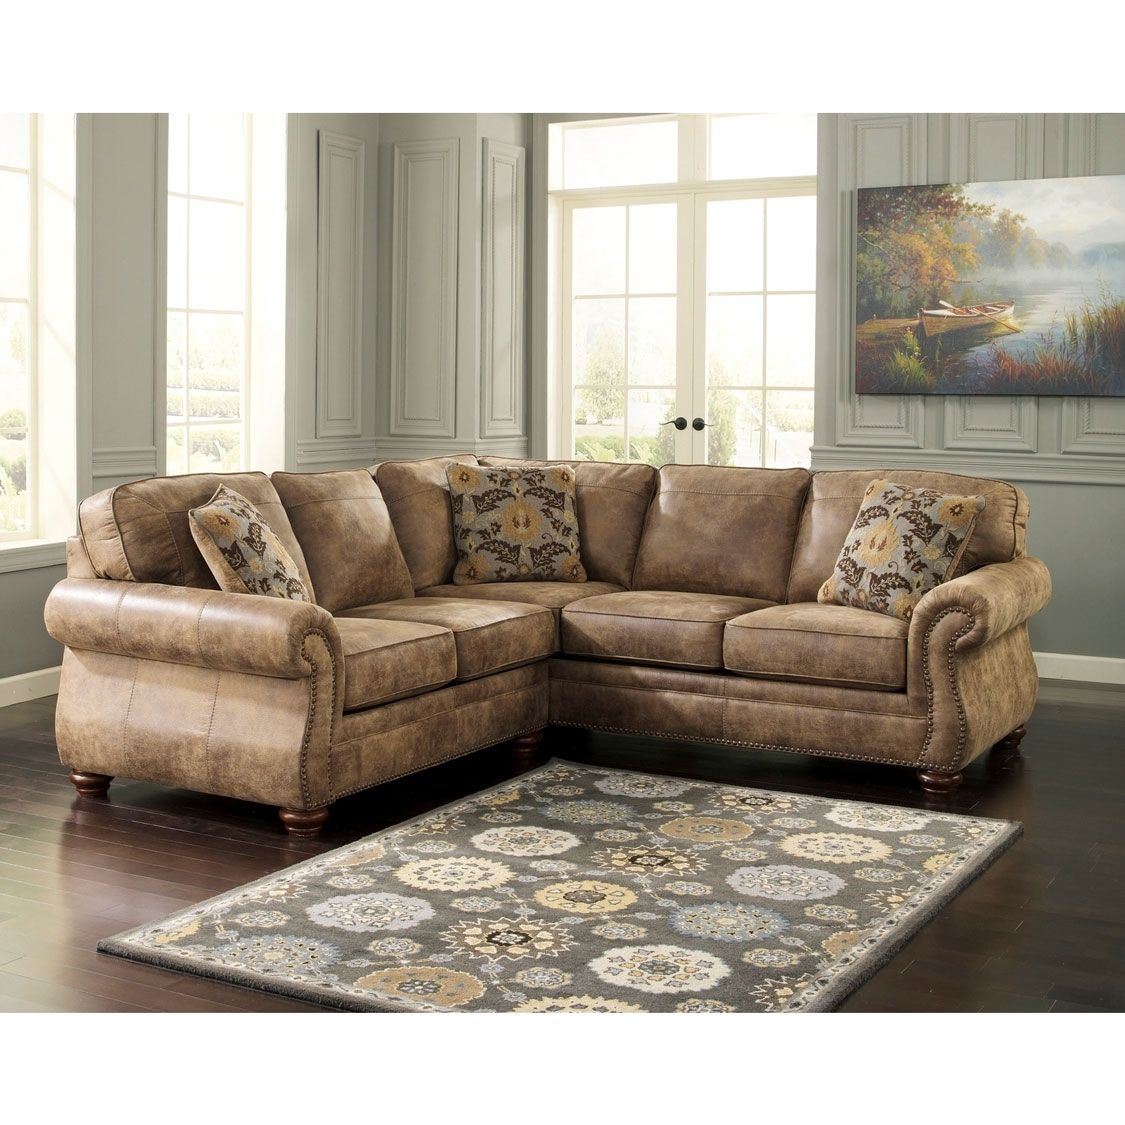 Sectional Sofa. Magnificent Collection Of Sectional Sofas Tucson Regarding Tucson Sectional Sofas (Photo 5 of 10)